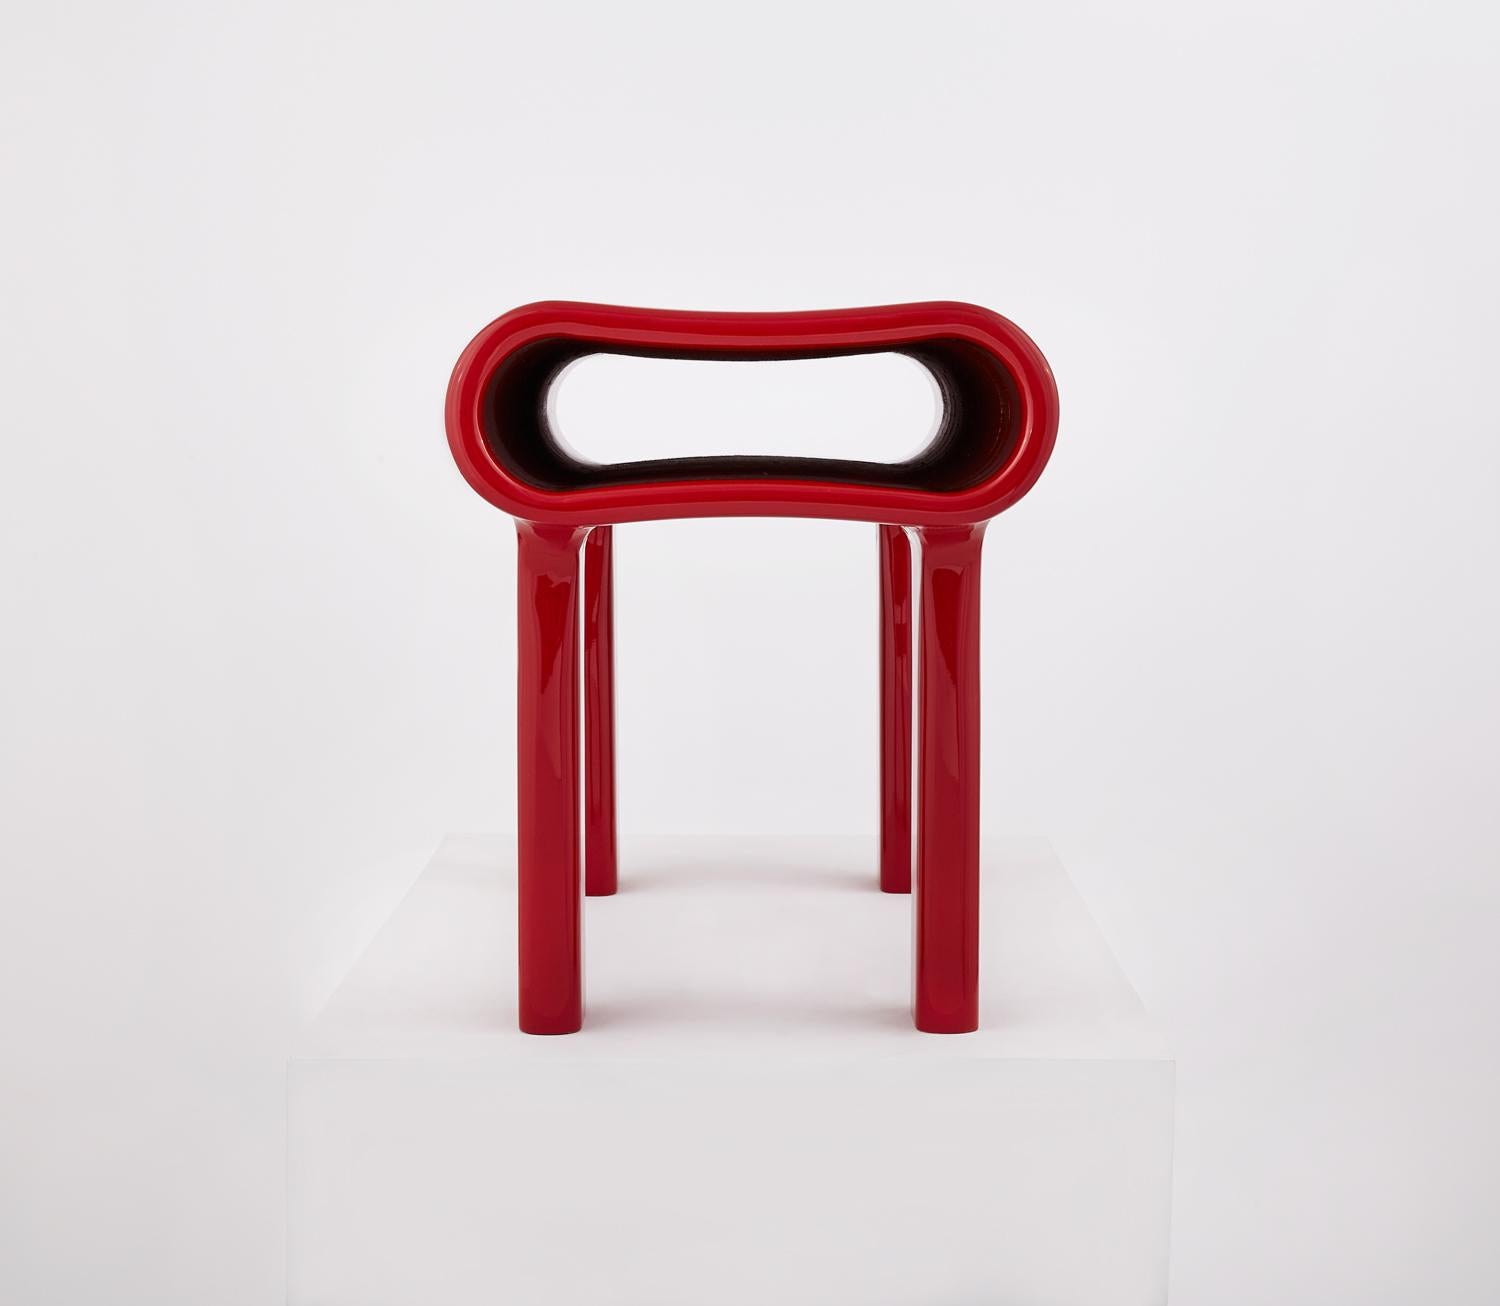 Contemporary sculpted red, wood bench with acrylic finish. Each Bench is constructed from solid beech and coated with a gloss acrylic finish. Designed by Zelonky Studios, An instant Minimalist icon, joining the pantheon of iconic minamalist artists,